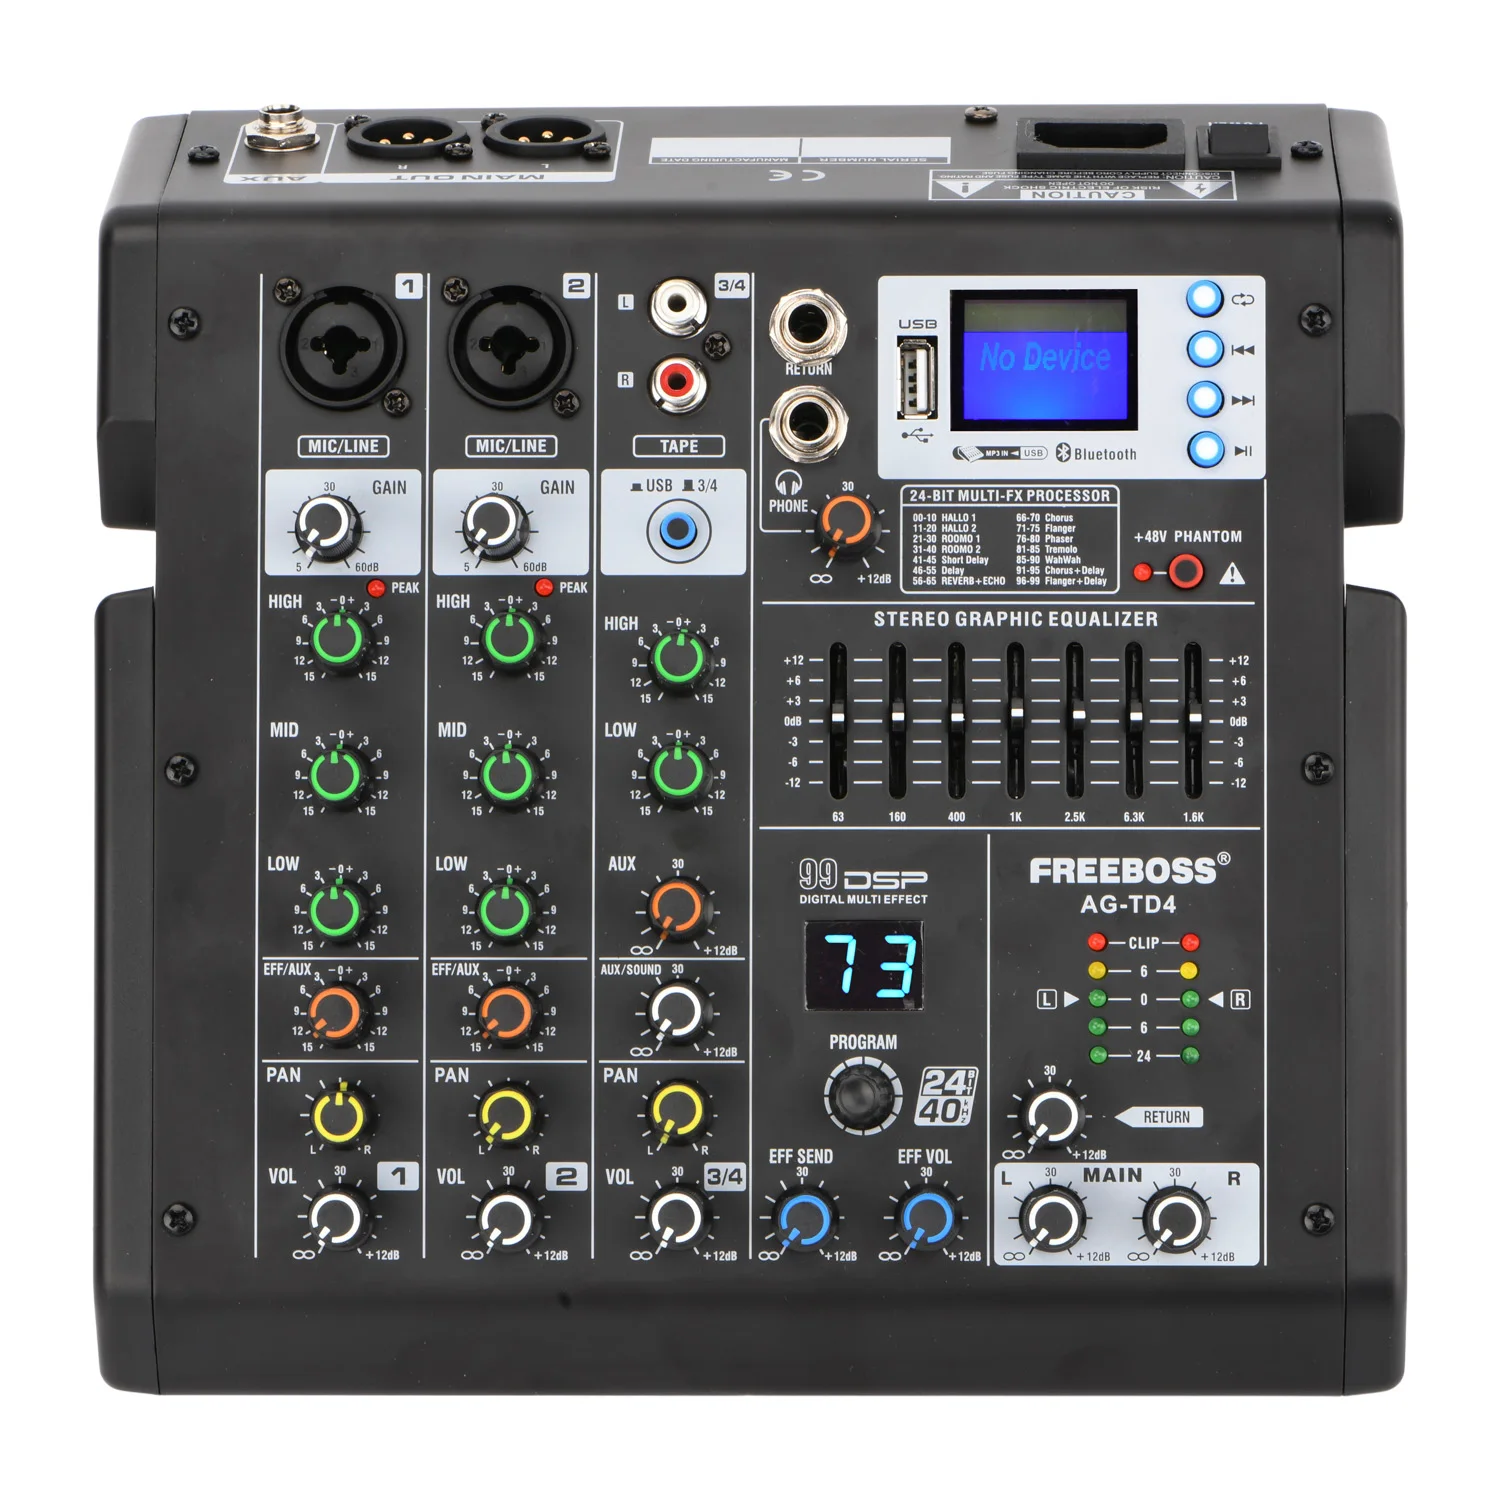 

FREEBOSS 4 Channel Sound Audio Mixer Bluetooth 99 DSP Effects Mixing Console USB Play Record 7-band EQ 48V Phantom Power AG-TD4